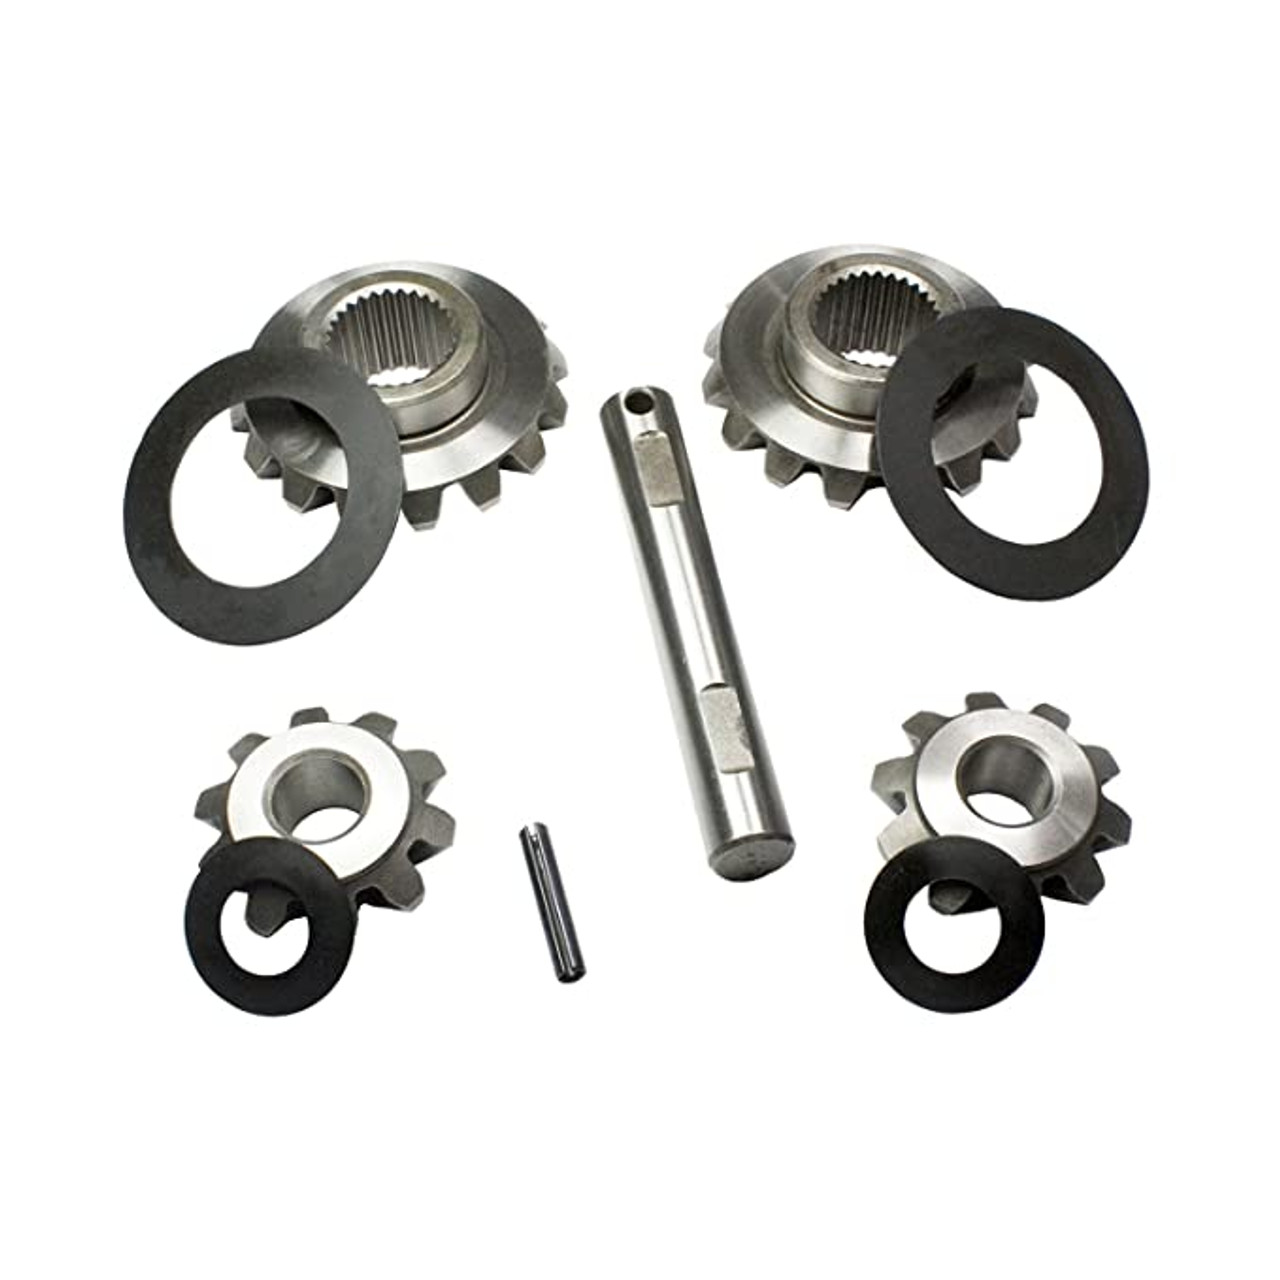  USA Standard Gear (ZIKF9.75-S-34) Spider Gear Set for Ford 9.75  Differential : Automotive